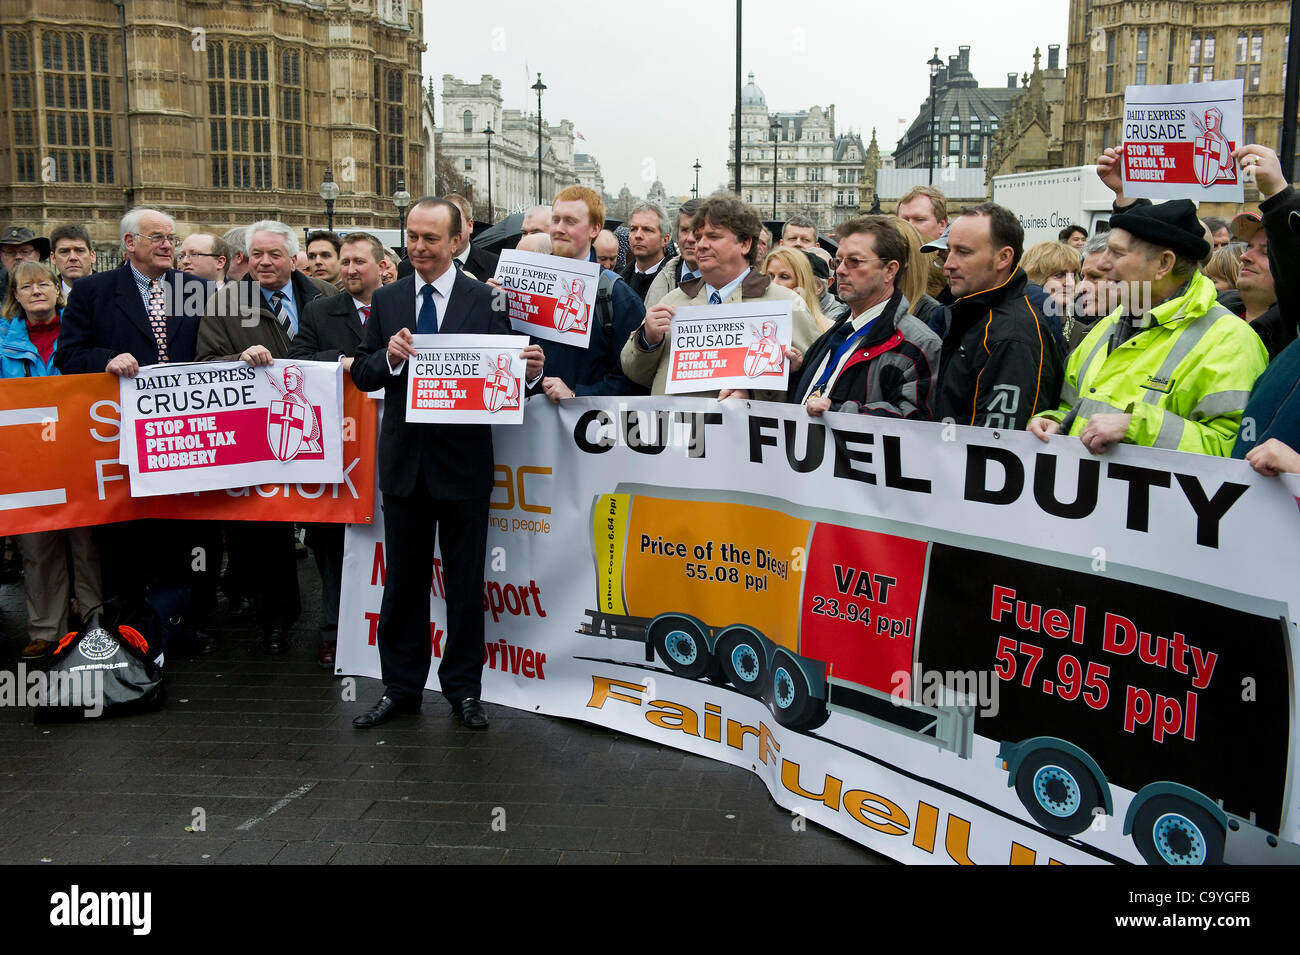 Quentin Willson, ex Top Gear, leads the protest (in front of banner). The campaign for fair fuel prices, supported by the RAC, arranges a mass lobby of their MP's over the cost of fuel duty and its impact on motorists. Westminster, London, UK, 7 March 2012. Stock Photo